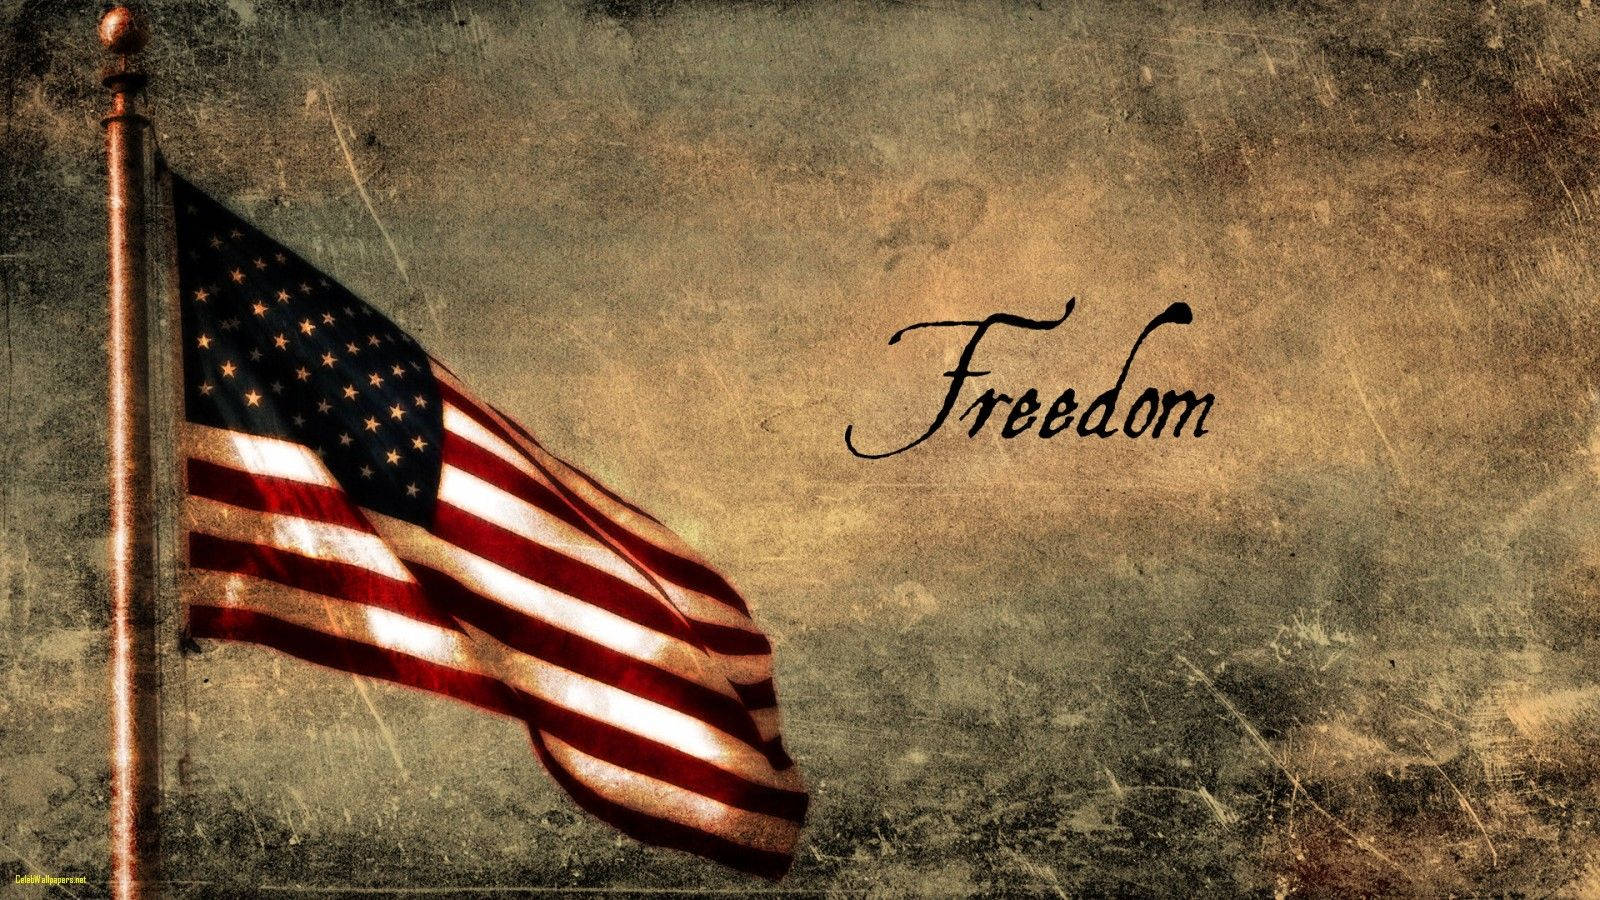 Freedom wallpapers for desktop, download free Freedom pictures and  backgrounds for PC | mob.org